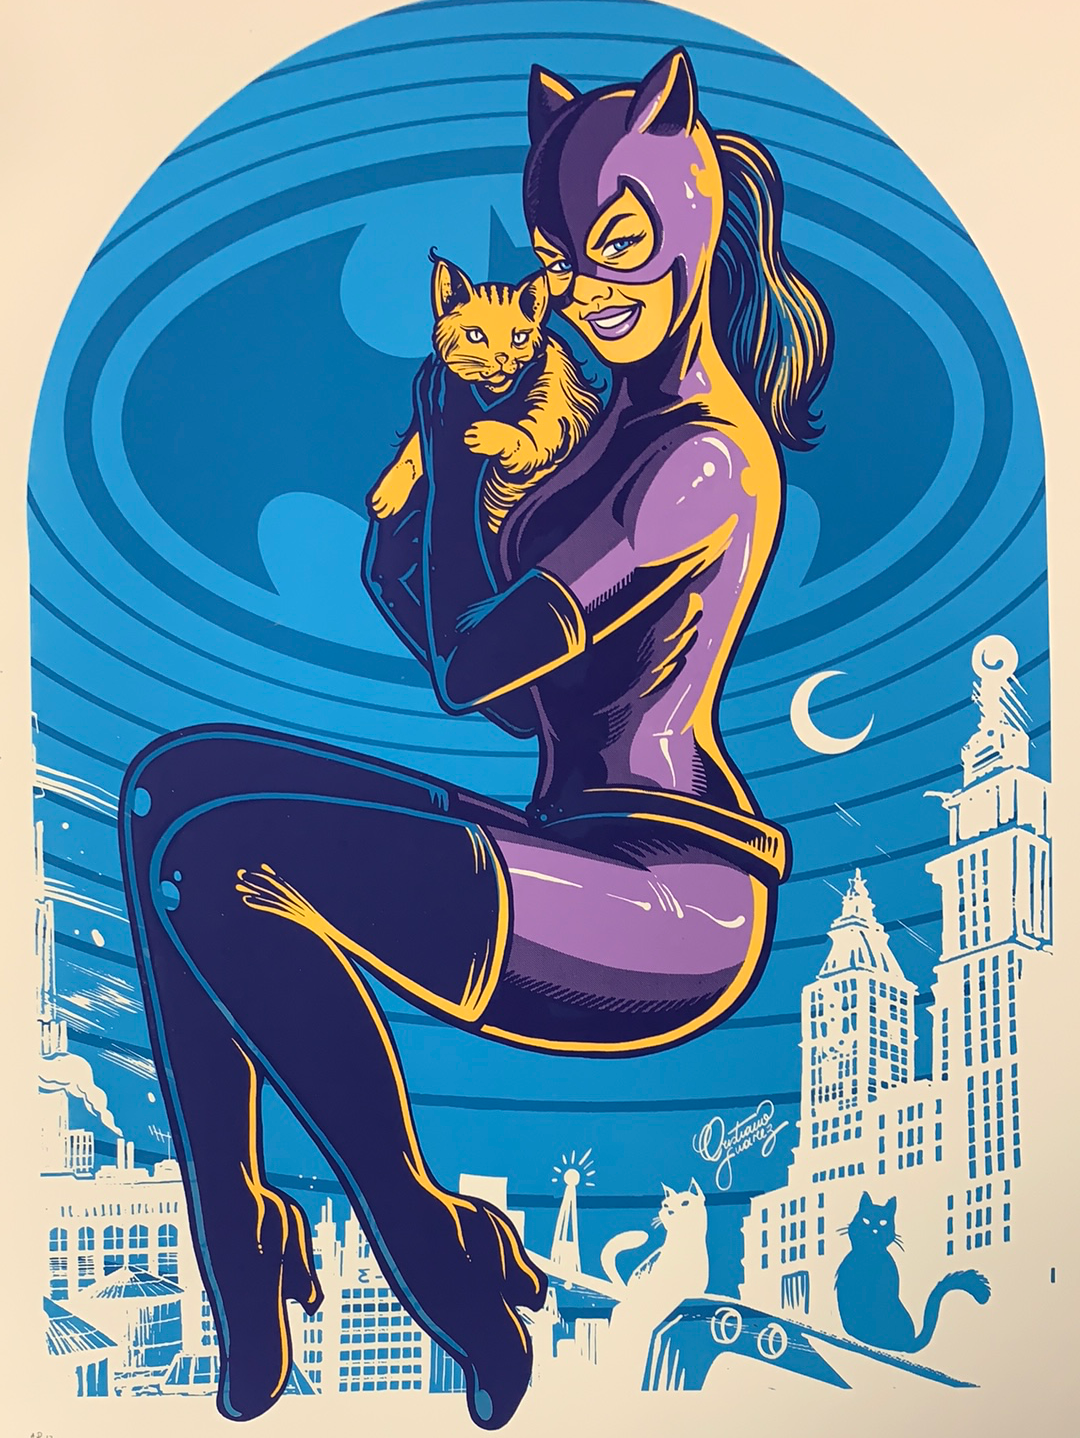 catwoman movie poster